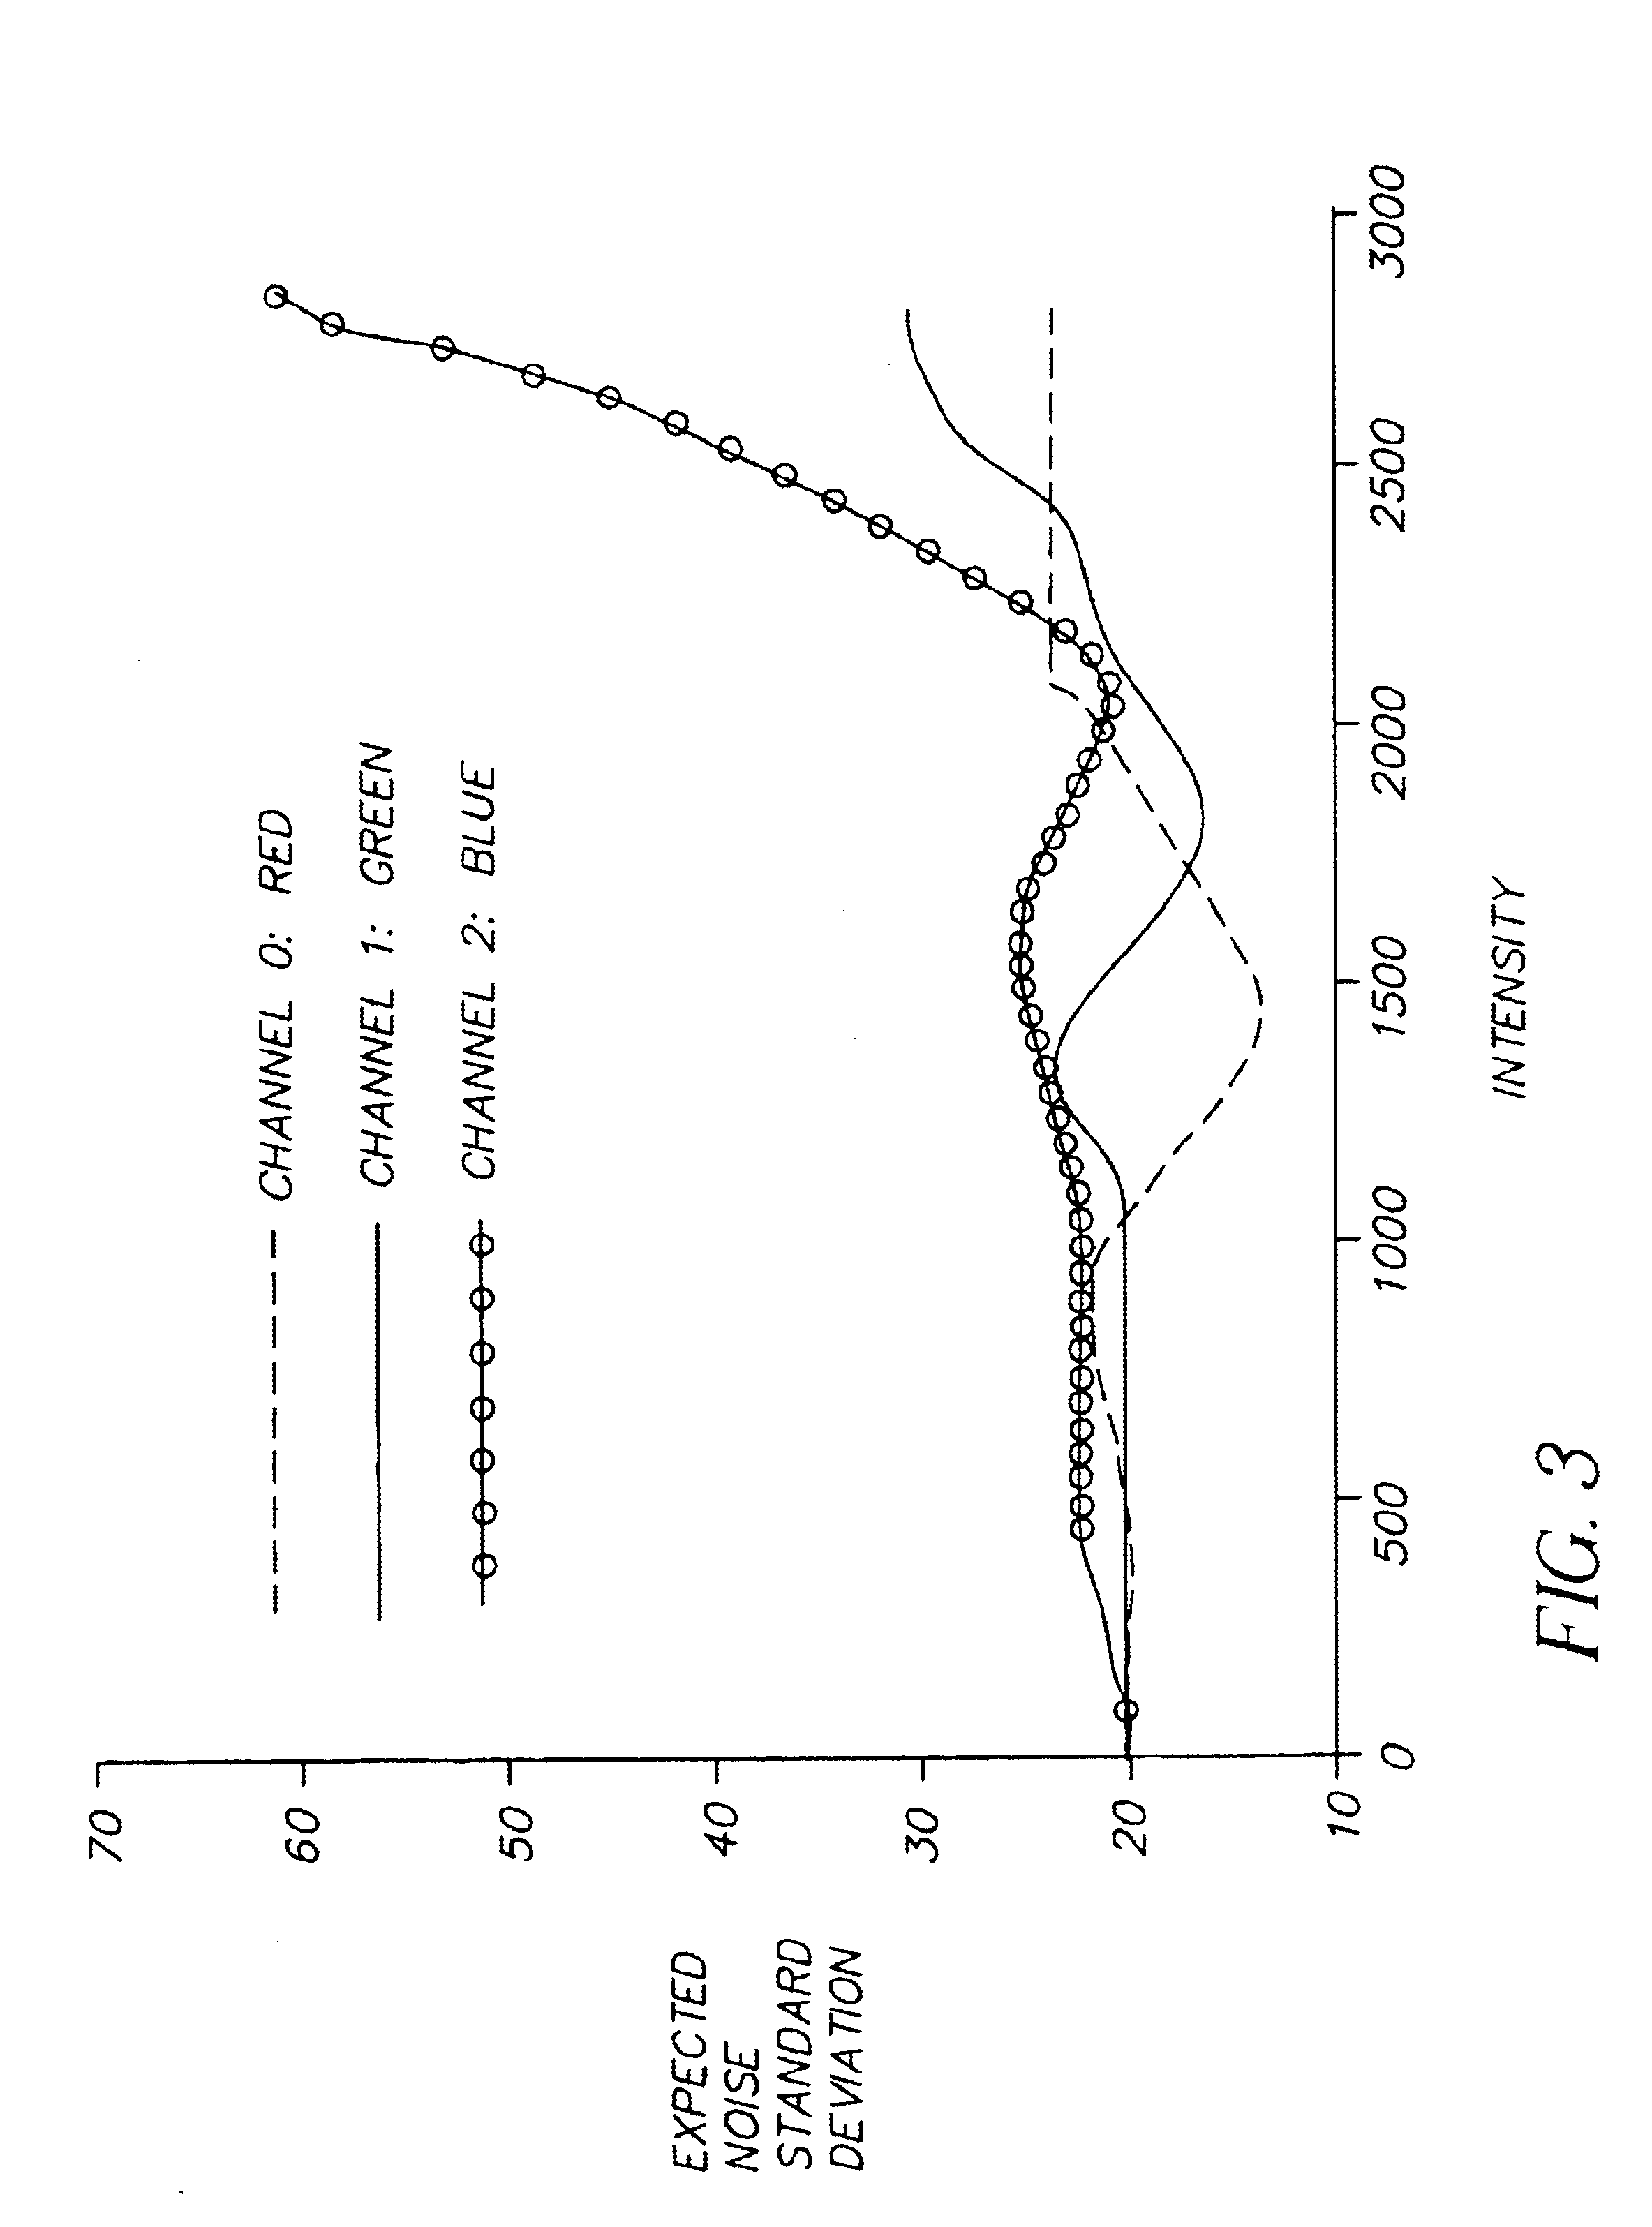 Method for sharpening a digital image without amplifying noise